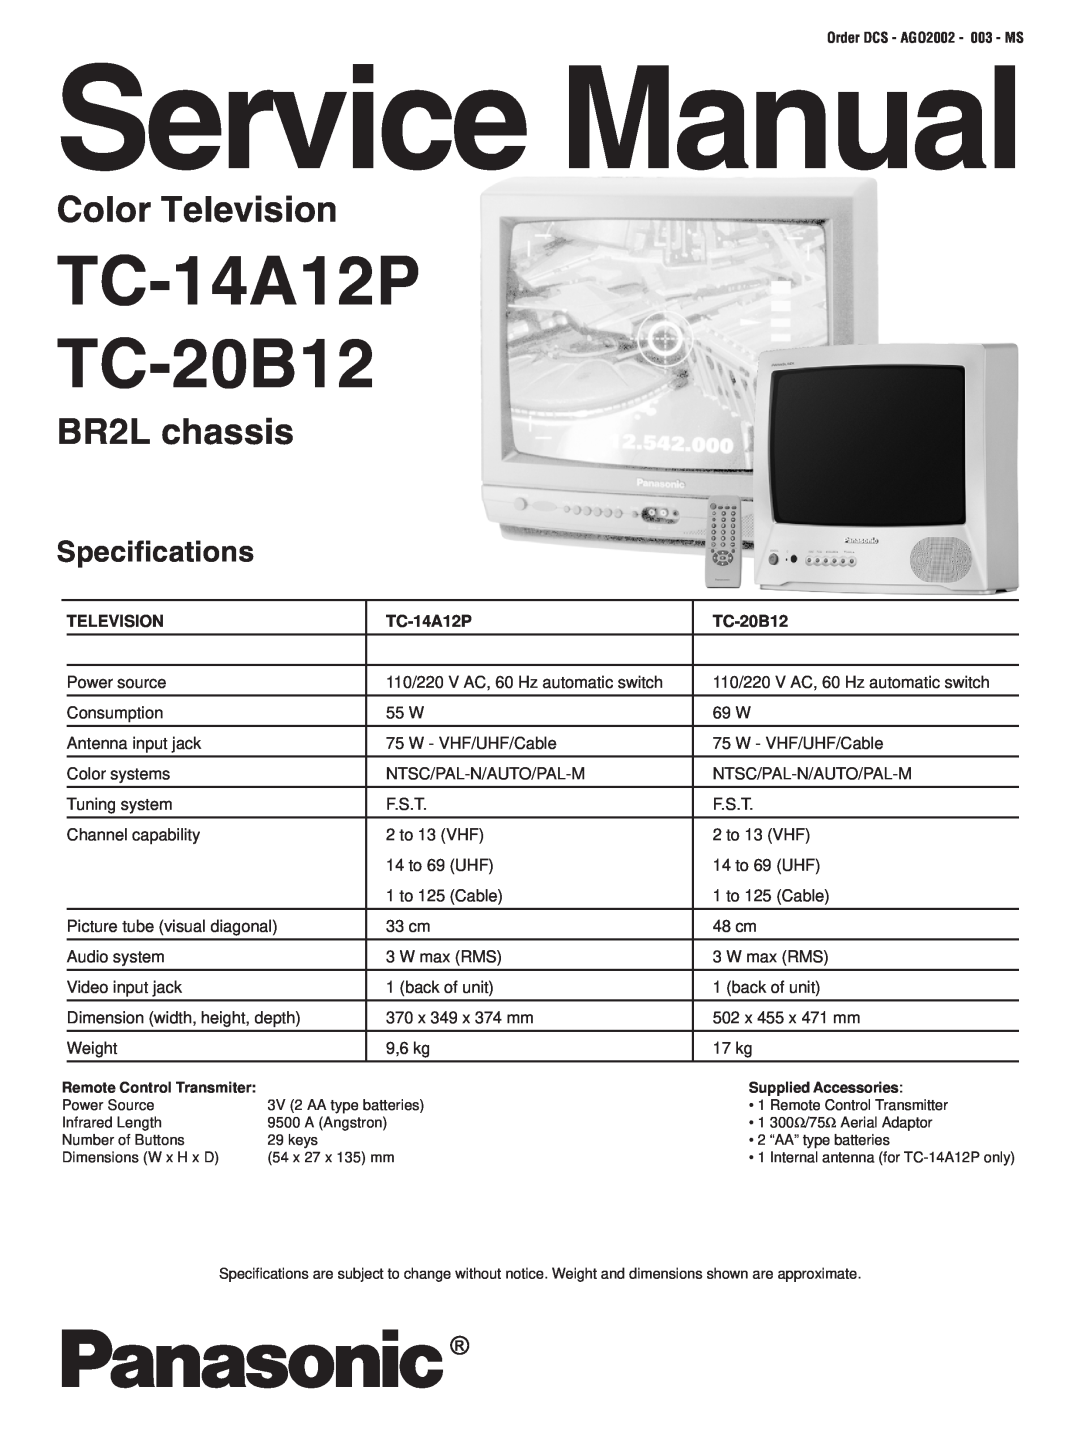 Panasonic service manual TC-14A12P TC-20B12, Color Television, BR2L chassis, Specifications 